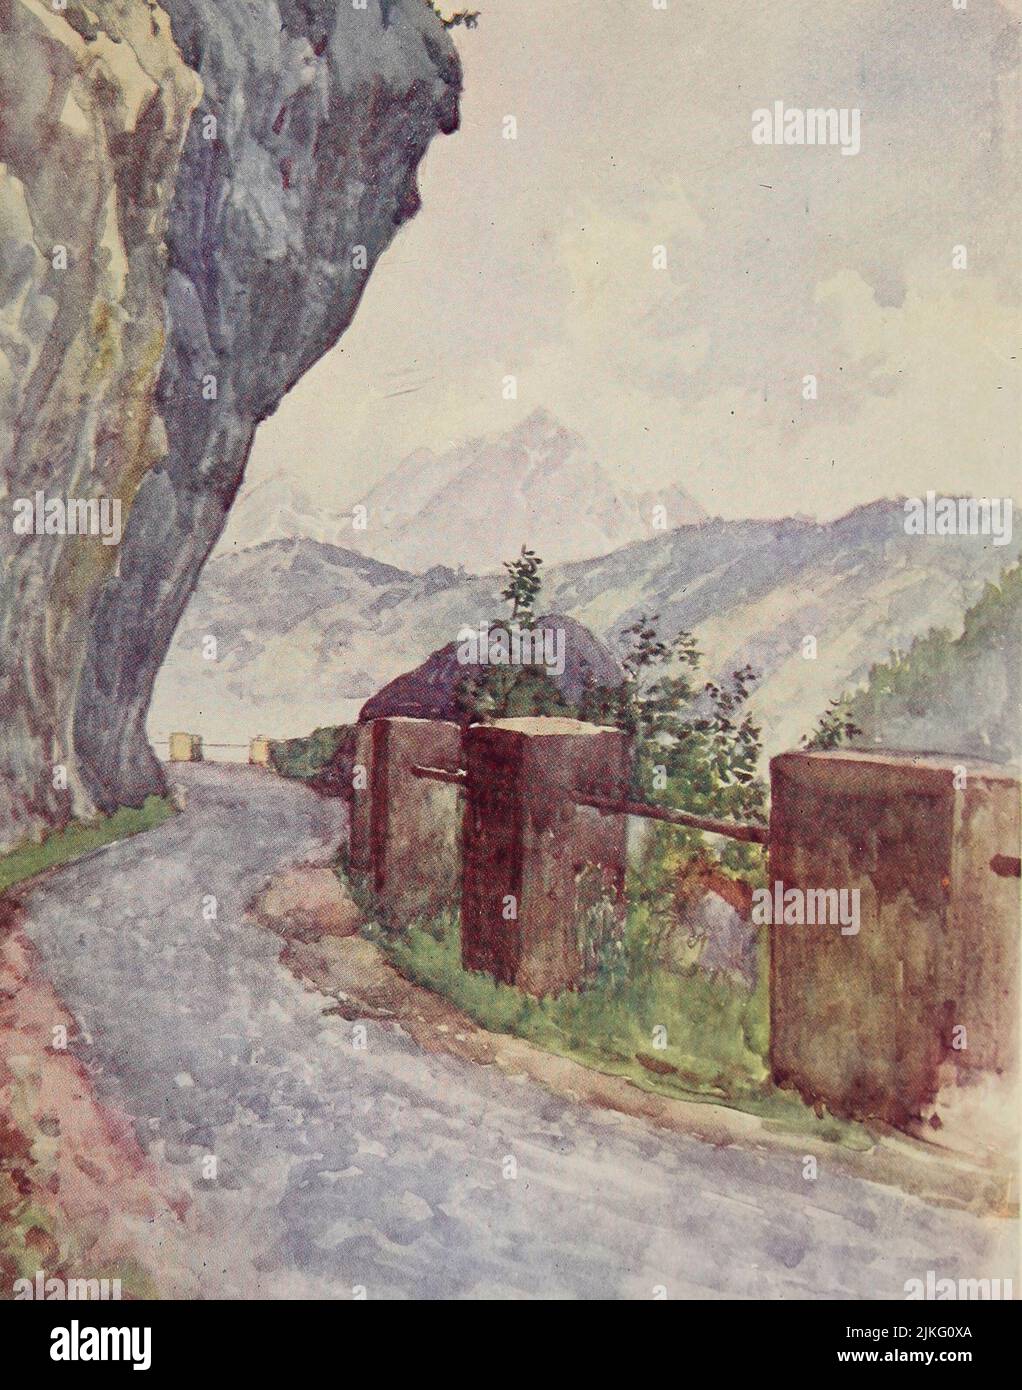 The Road from Vitznau to Gersau The Obere nase corner. Pilatus group in the distance Painted by A. D. McCormick from the book ' The Alps ' by Sir William Martin Conway,  Publication date 1904 Publisher London : Adam and Charles Black Arthur David McCormick FRGS (Coleraine 14 October 1860 – 1943) was a notable British illustrator and painter of landscapes, historical scenes, naval subjects, and genre scenes. Stock Photo